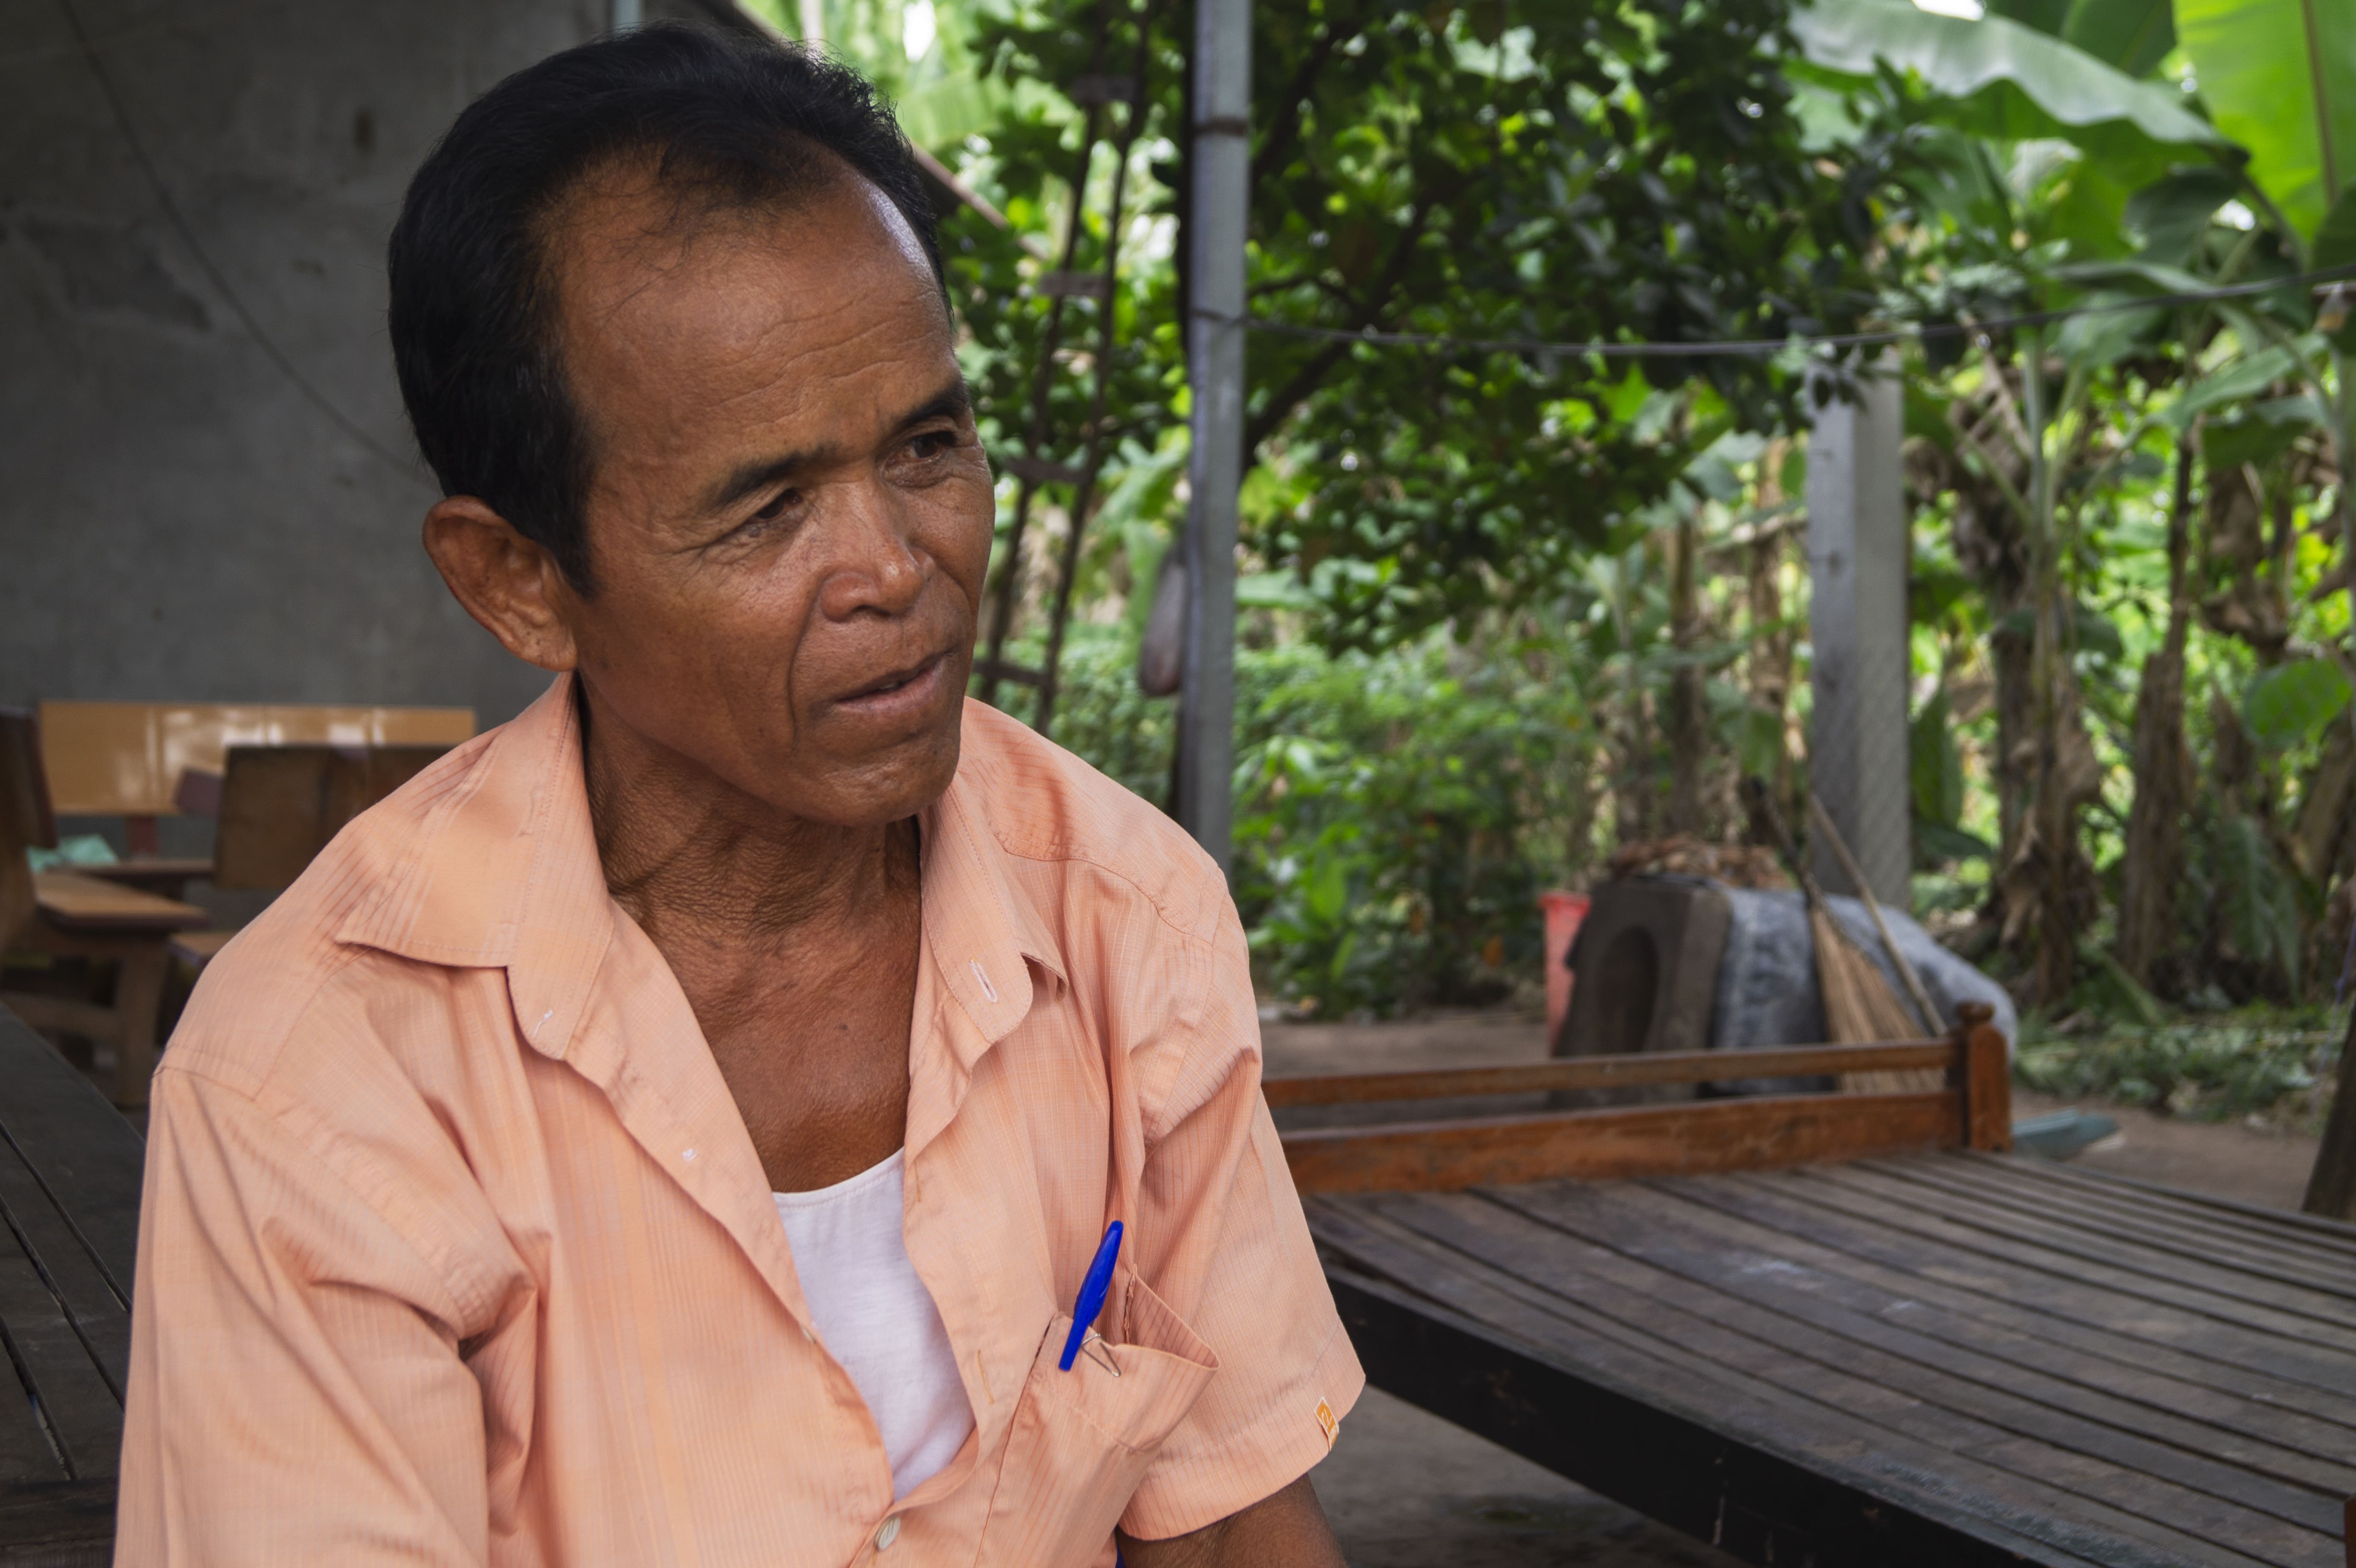 Thon Bun became deputy chief of Kampout Tuk village in 1991 before being "elected" as the chief in 2017. He remembers in 1970 being exposed to a powder, presumably Agent Orange, that felt “as if someone rubbed chili in your eyes.”